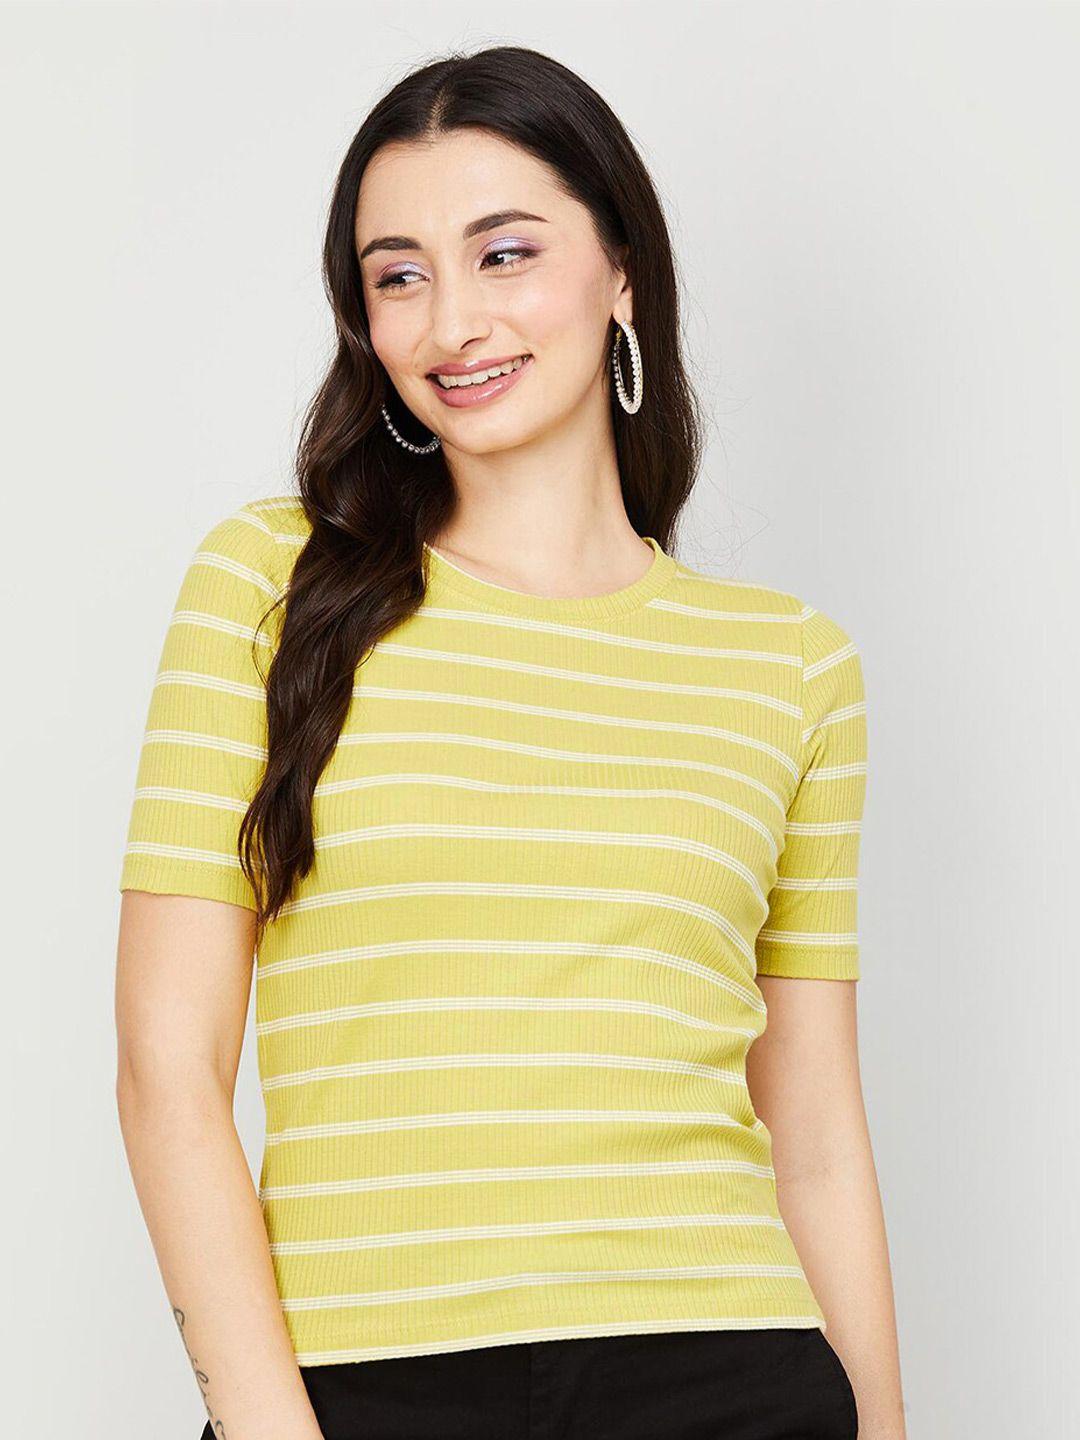 code by lifestyle round neck striped cotton top